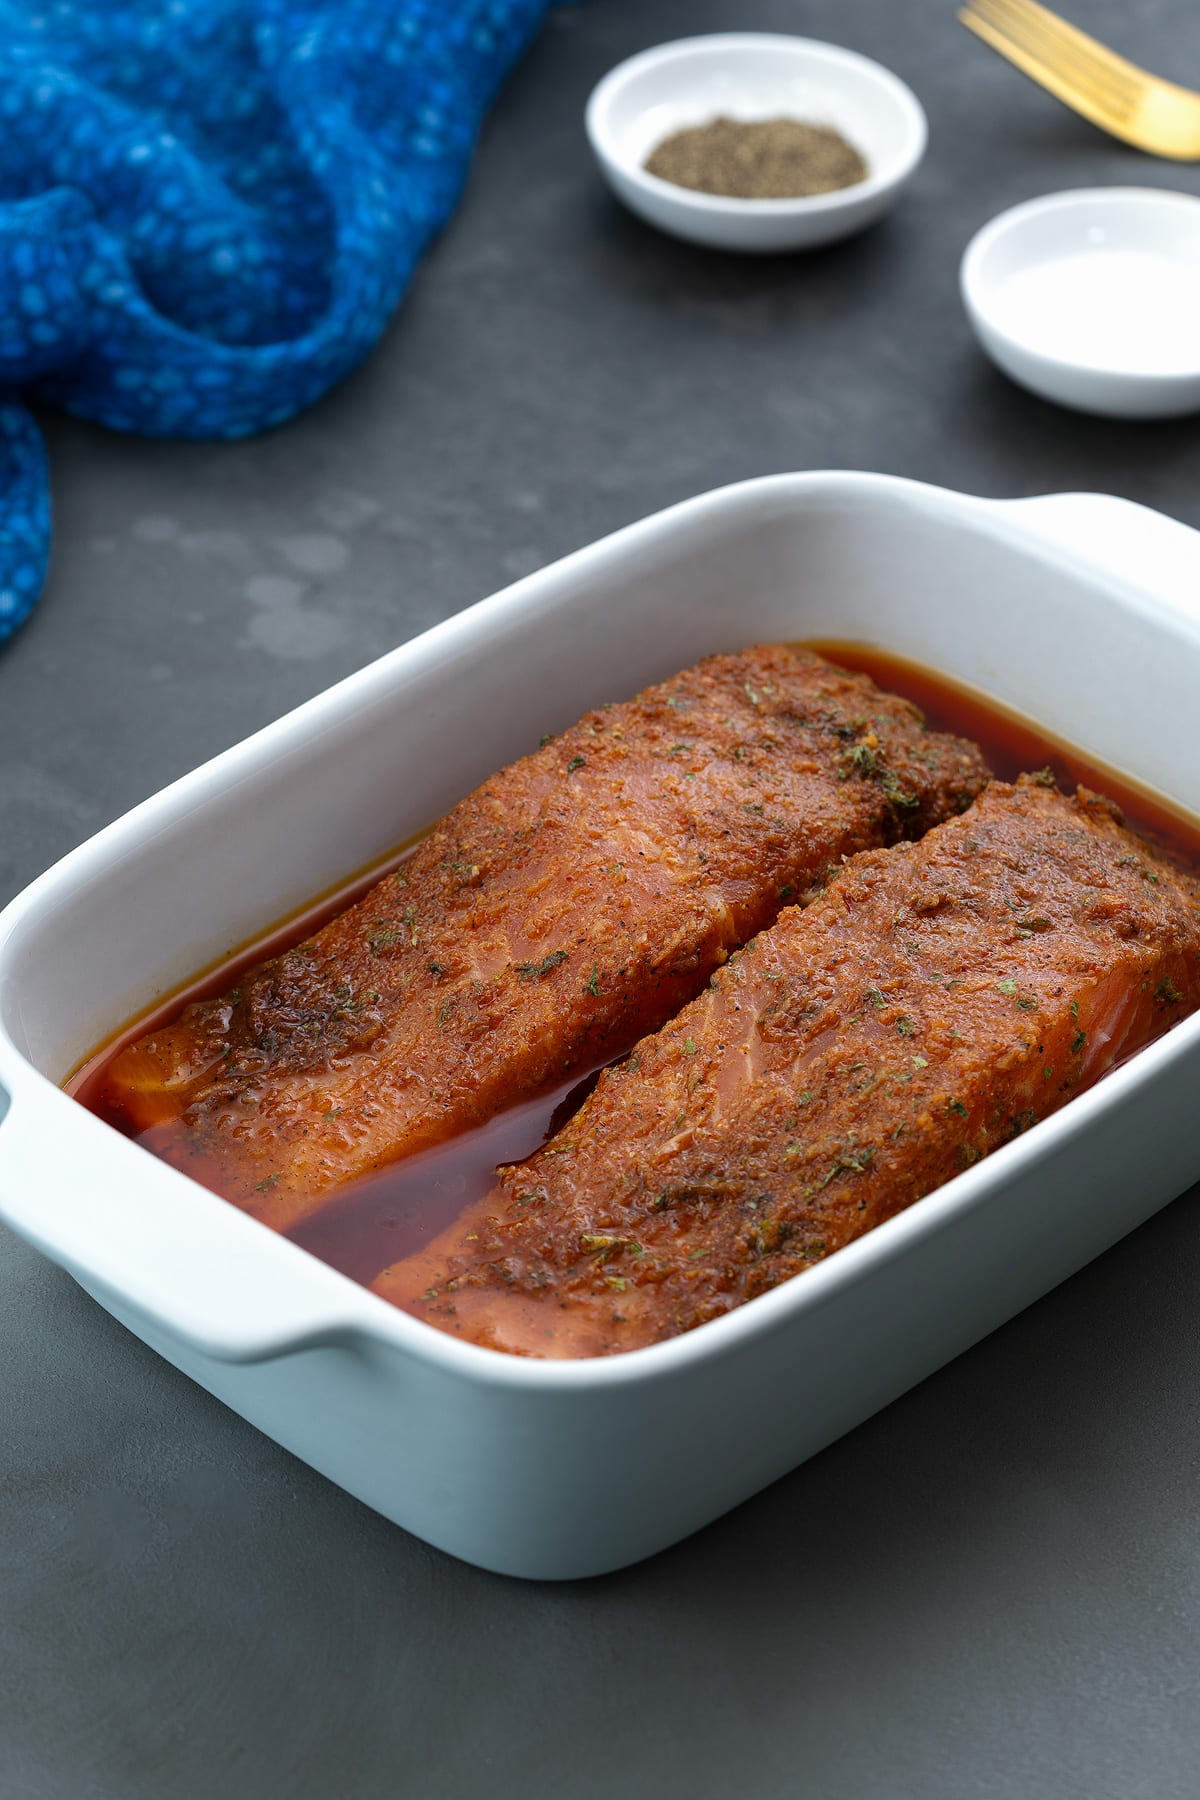 White baking tray filled with salmon fillets marinated in a freshly prepared homemade salmon marinade, accompanied by a small cup of salt and pepper and a blue towel.